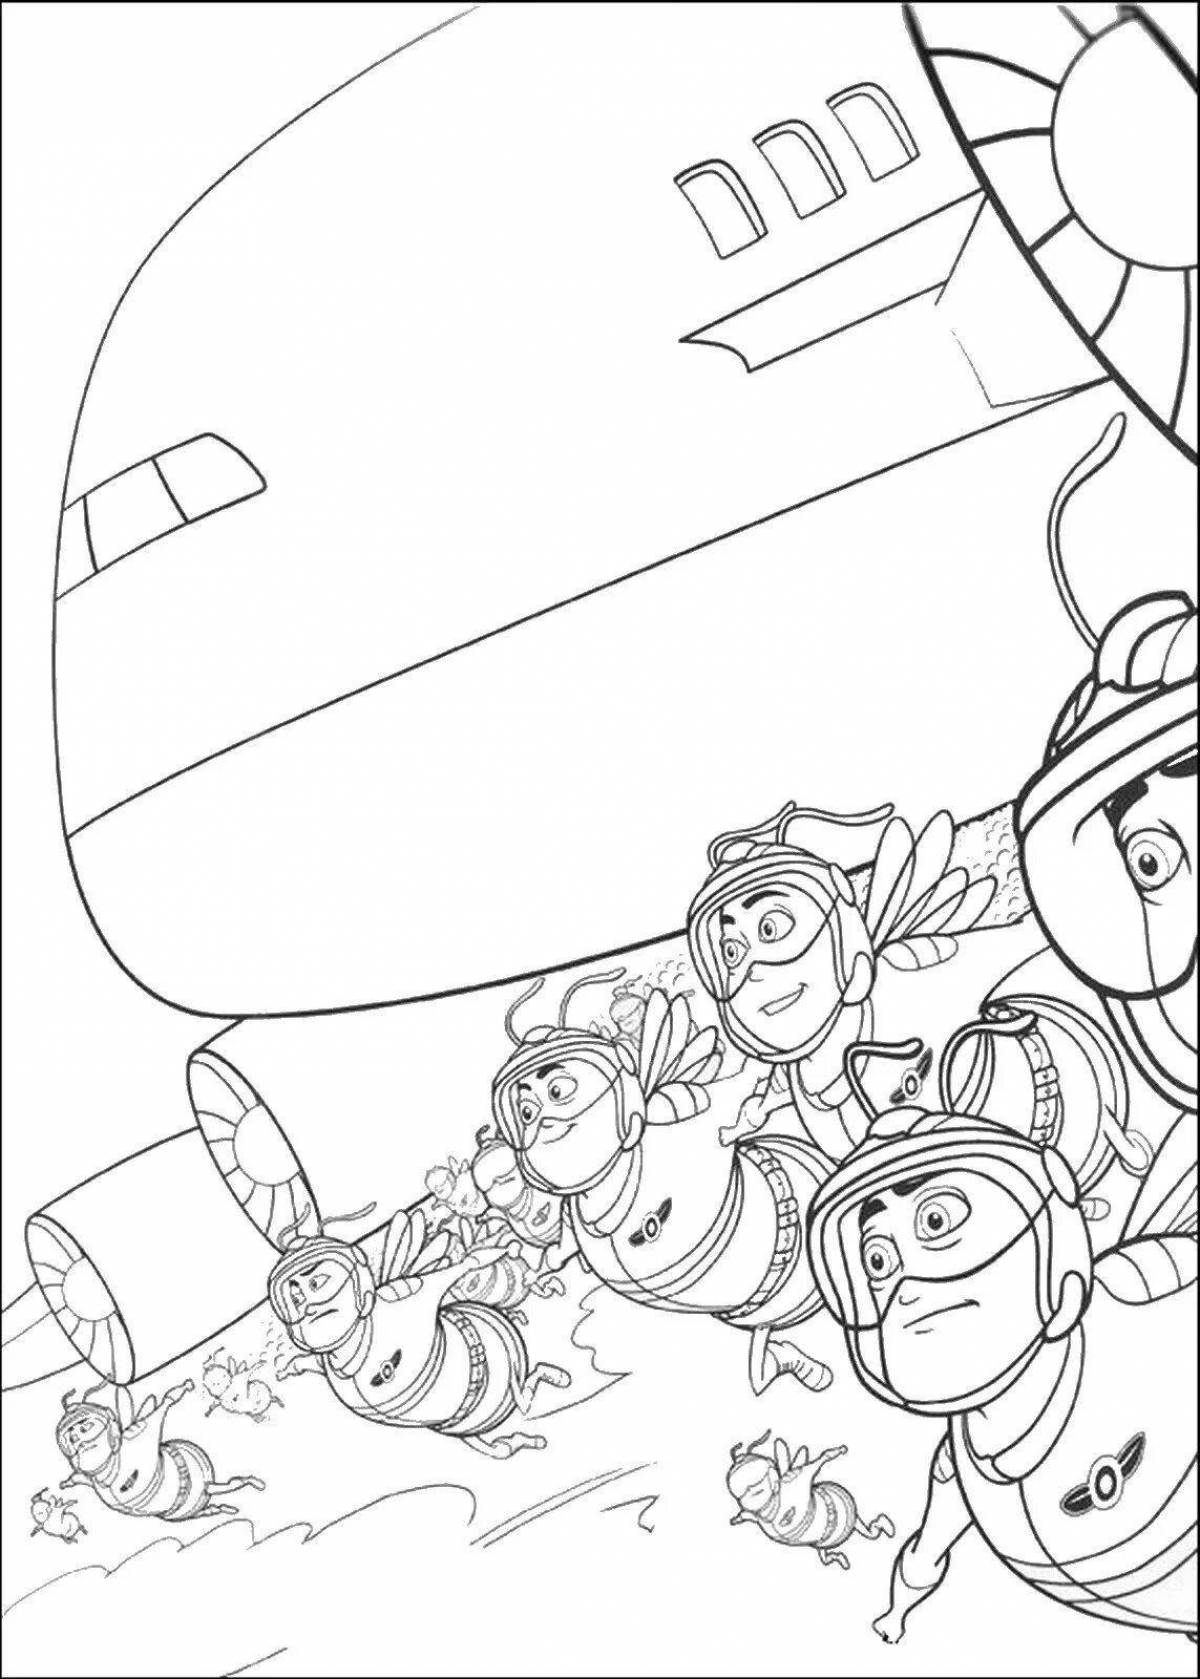 Sparkling honey plot coloring page